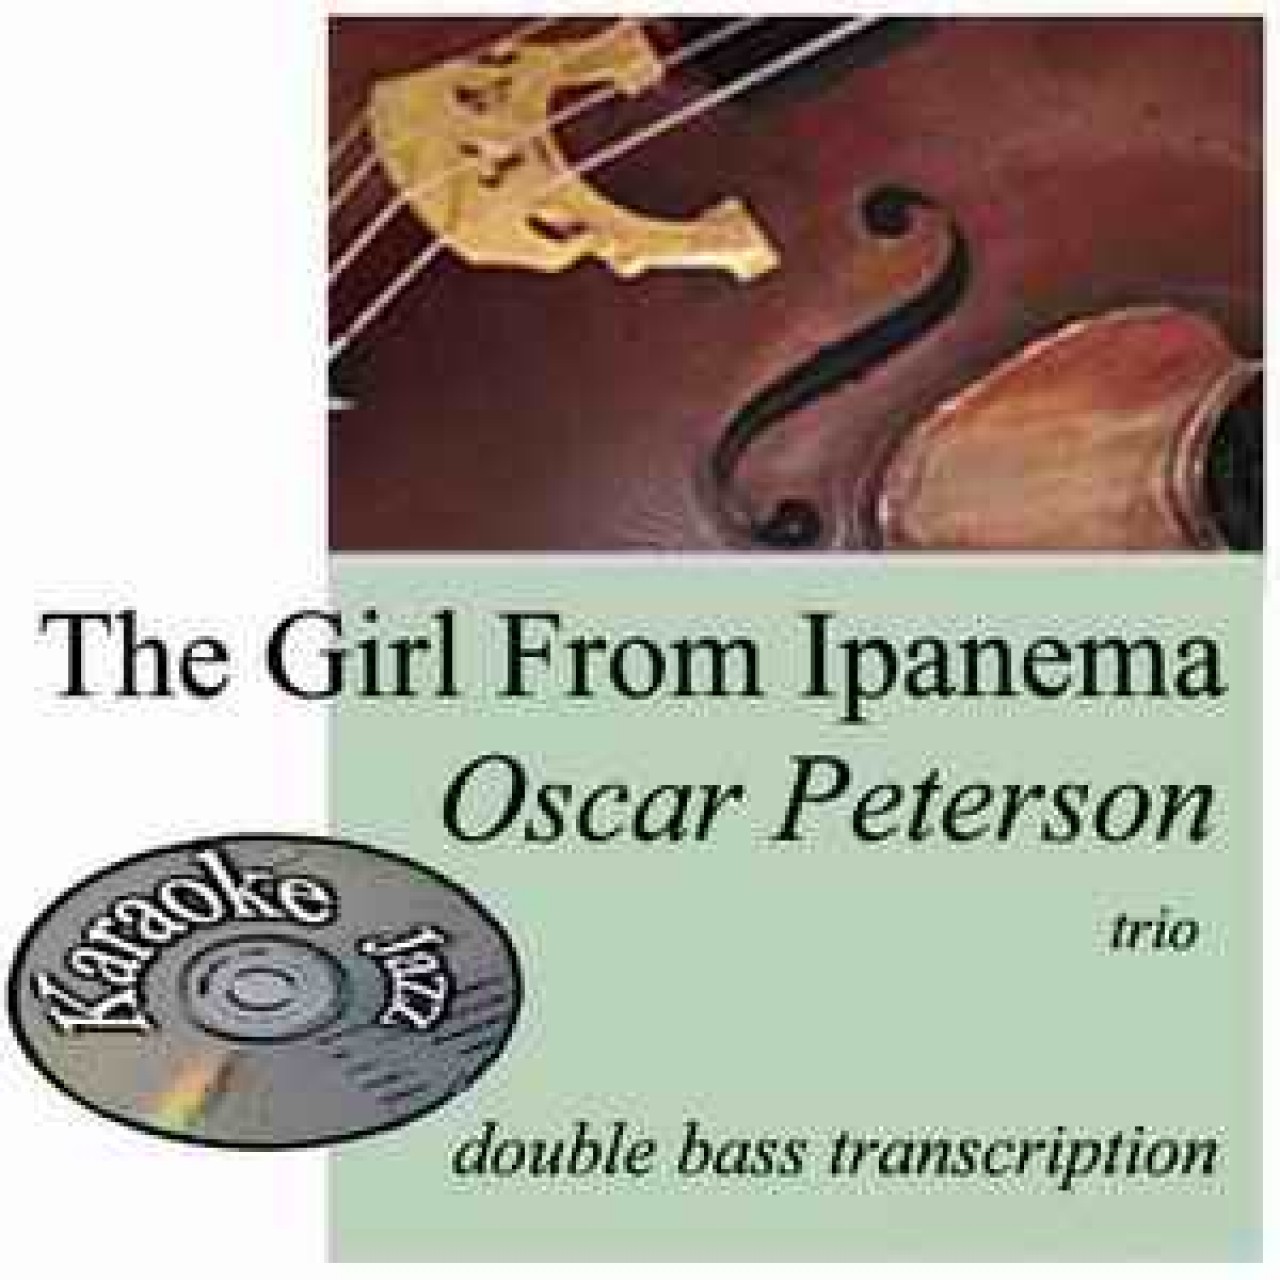 The Girl From Ipanema bass